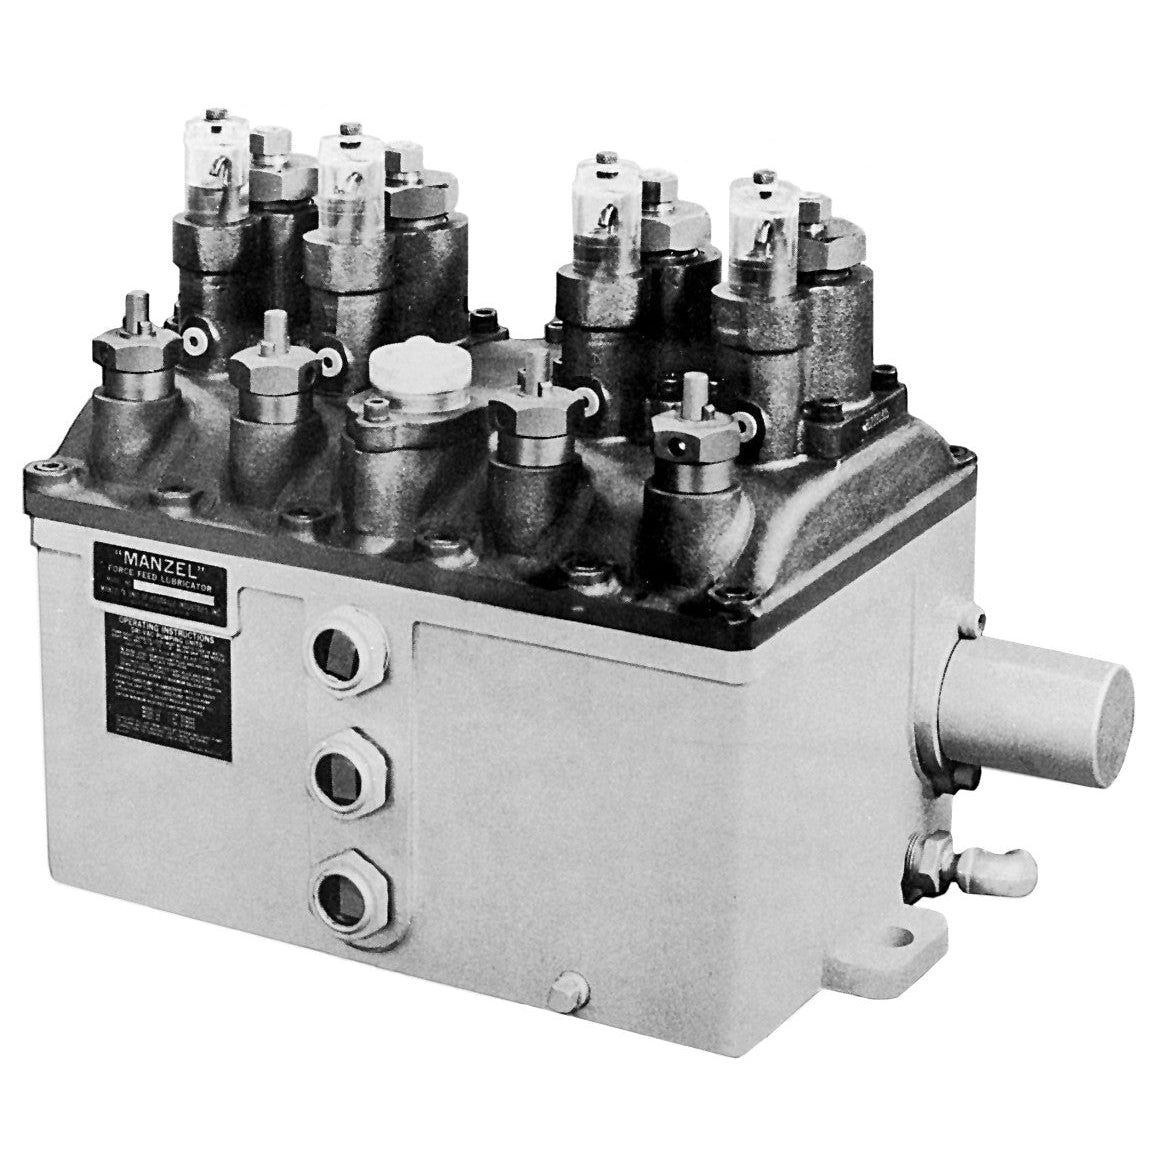 HP-50 Lubricator with 4 Pumps, Provisions for Flange Mounted Auto Fill, Low Level in Fill Plate, Proximity Switch